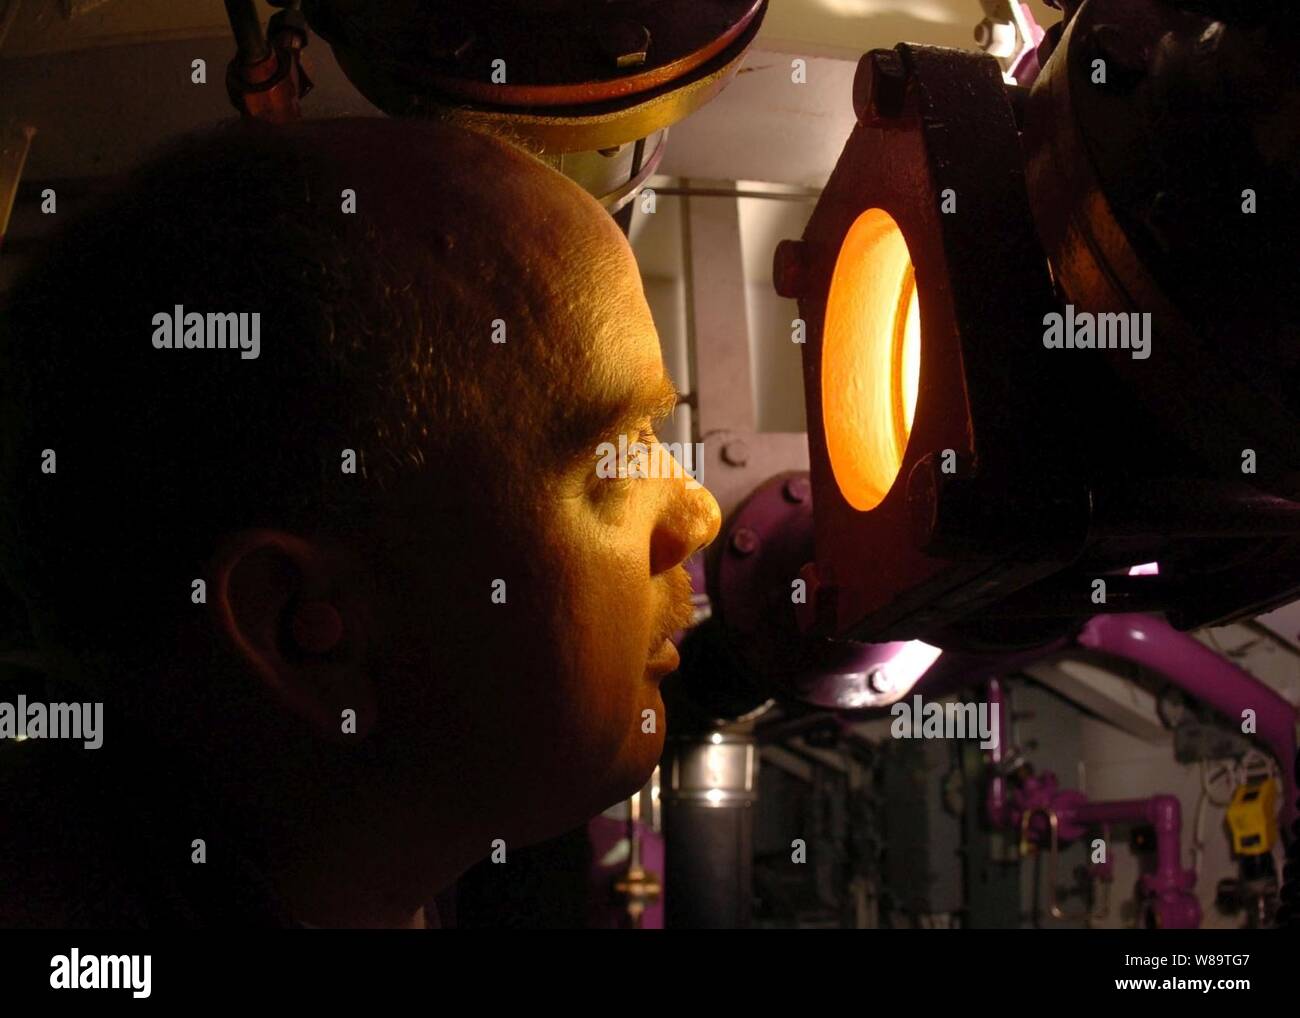 Navy Petty 3rd Class Kevin Luby looks through an illuminated sight glass to check for impurities in aviation fuel inside the JP-5 pump room aboard the aircraft carrier USS John C. Stennis (CVN 74) on Oct. 11, 2006.  Luby is a Navy aviation boatswainís mate who specializes in aircraft fuel. Stock Photo